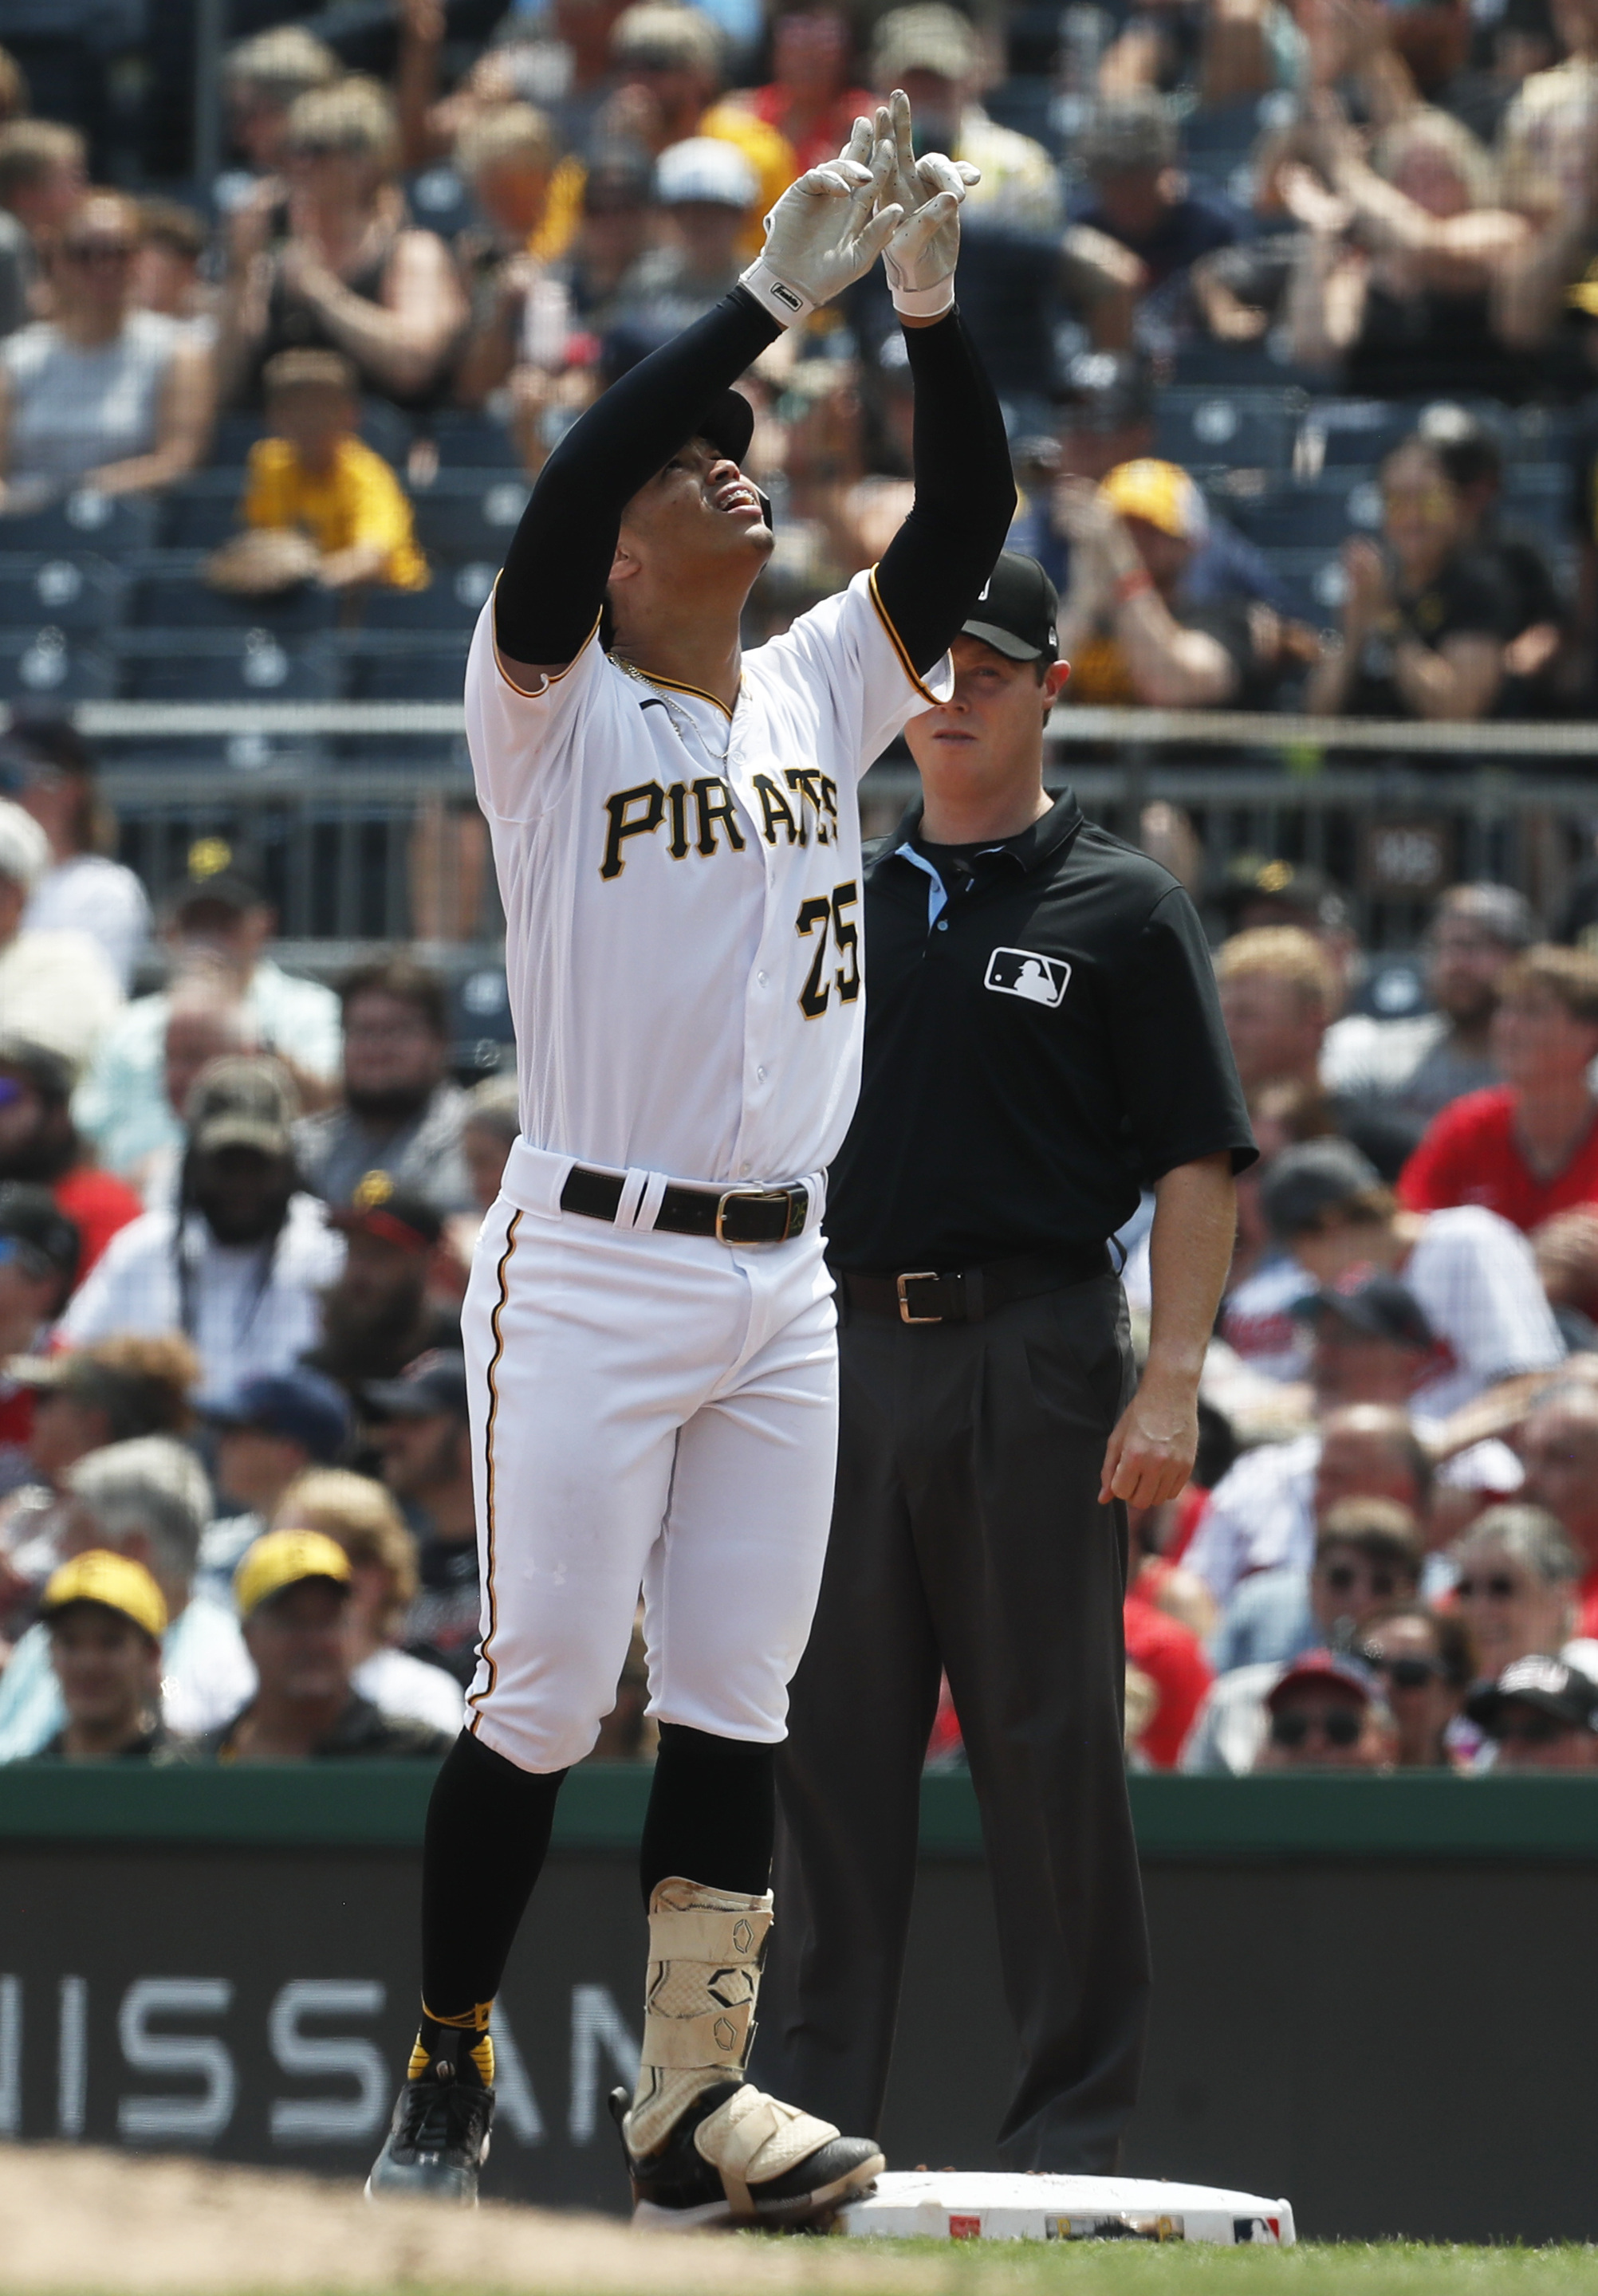 Pirates rally to topple Guardians, avoid sweep